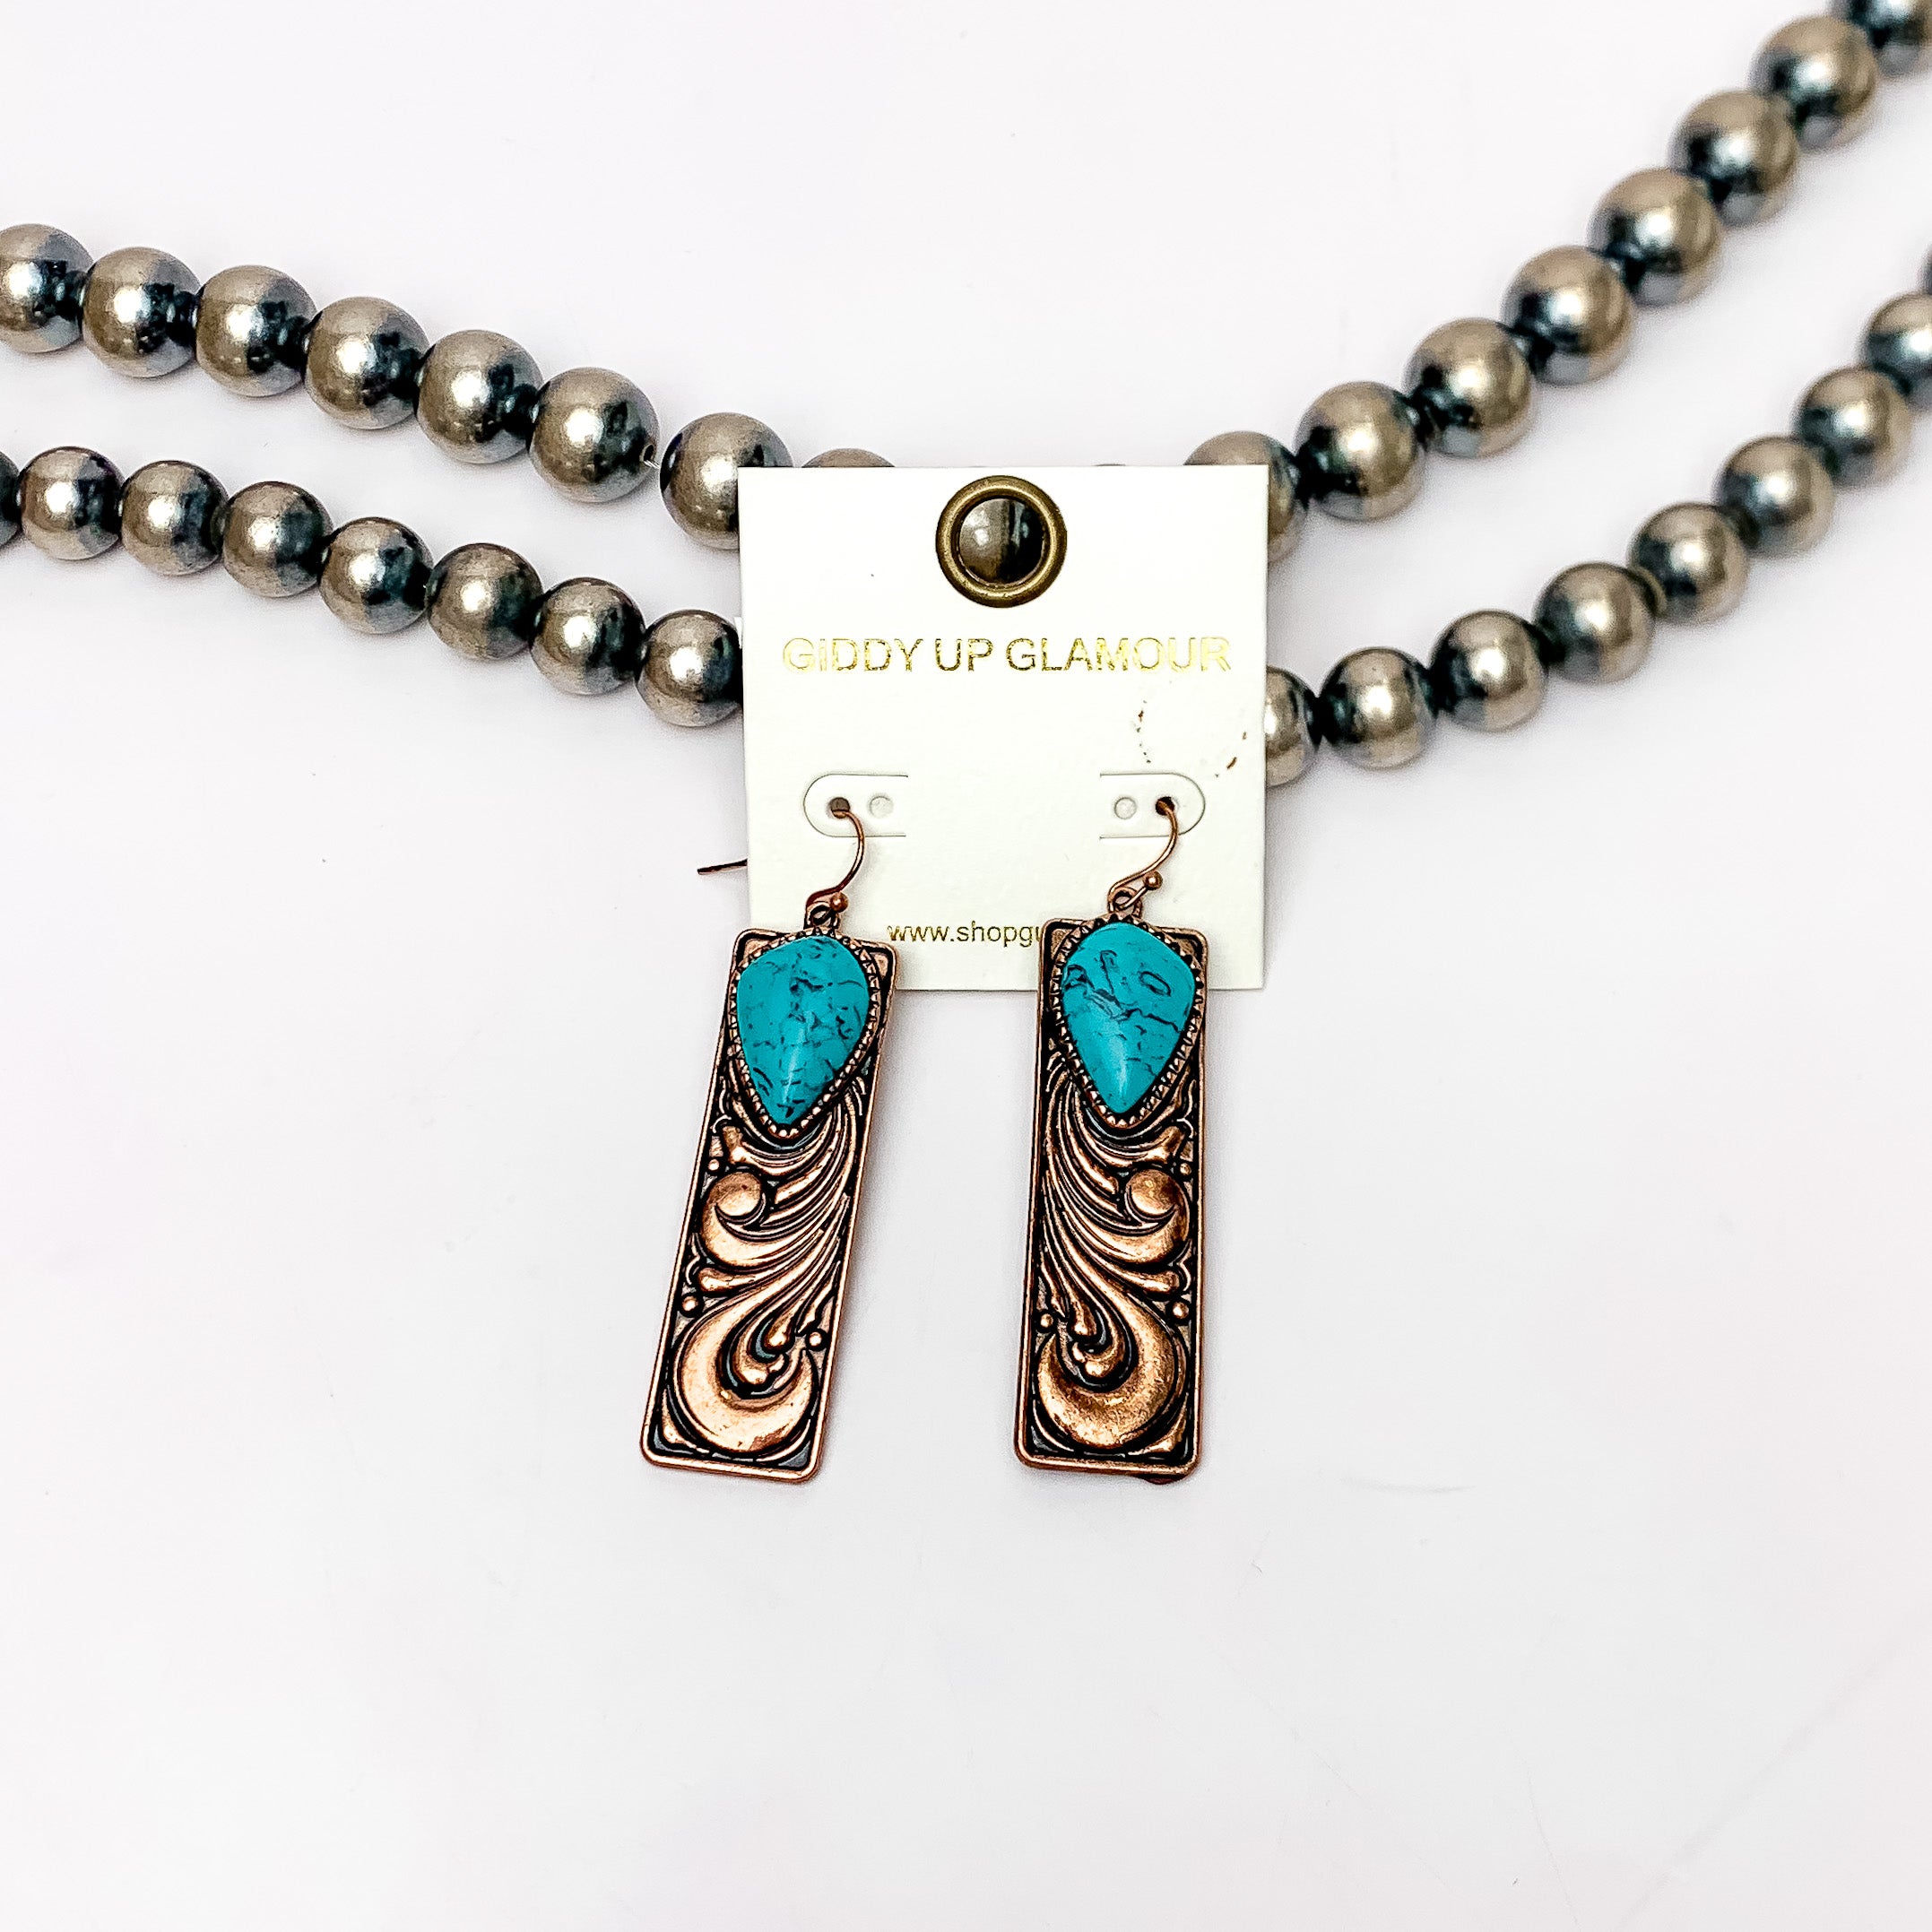 Western Swirl Copper tone Rectangular Earrings With Turquoise Blue Stone. Pictured on a white background with Navajo beads behind the earrings.